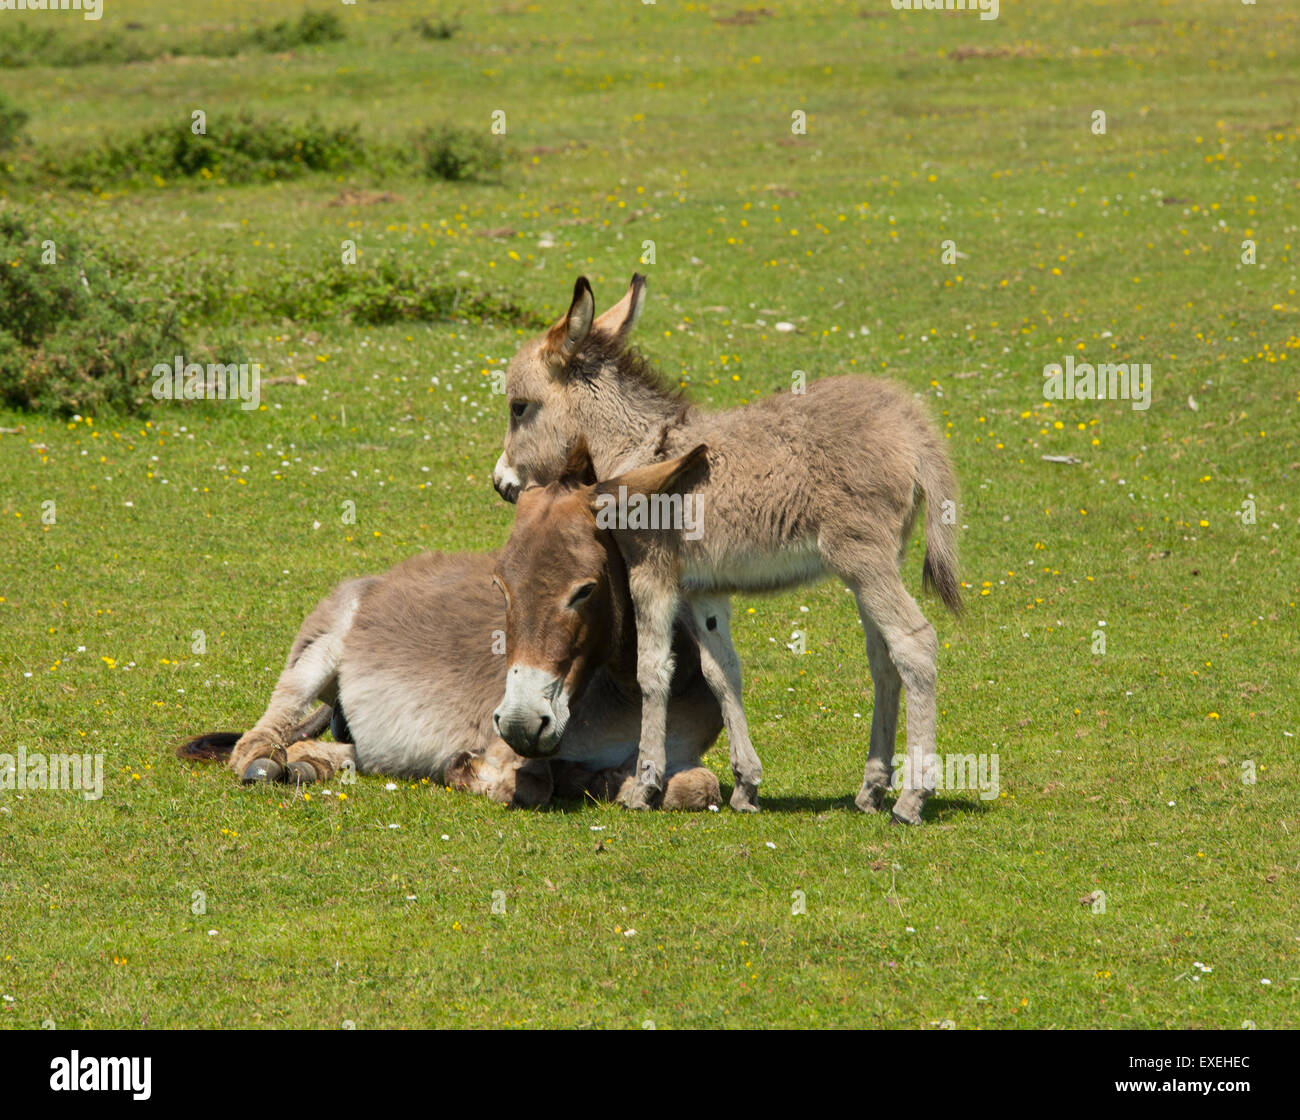 Mother and baby donkey showing love and affection in the New Forest Hampshire England UK cuddling in the summer sunshine Stock Photo